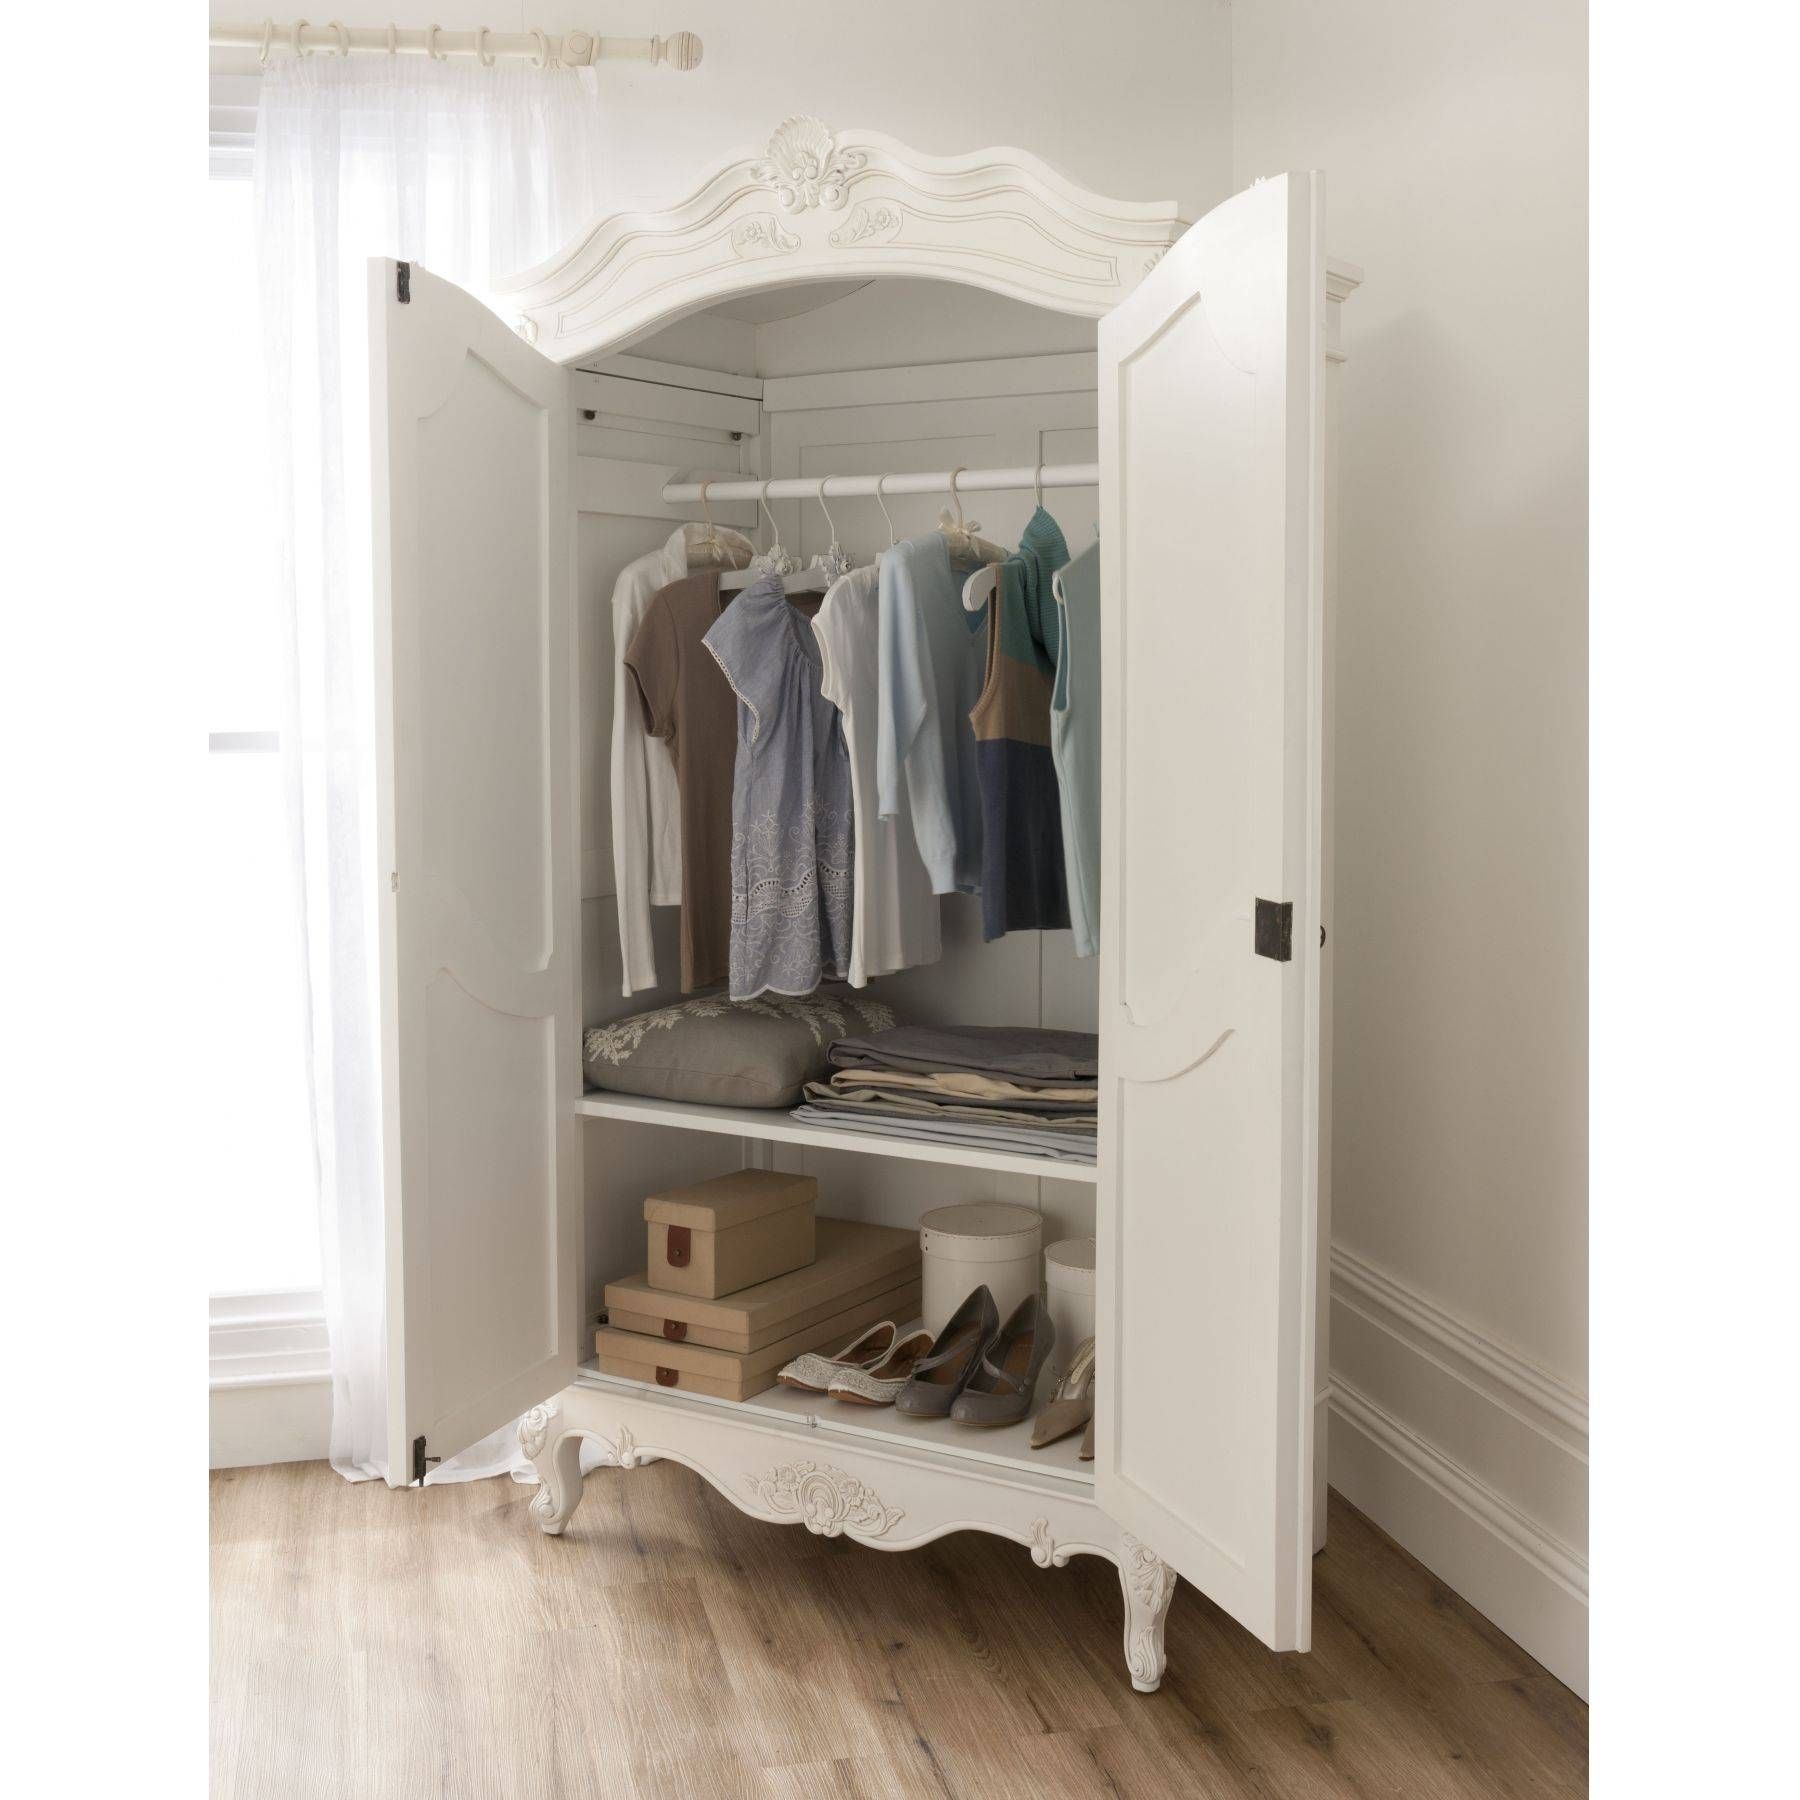 Baroque Antique French Wardrobe Is Available Online From Pertaining To French Style White Wardrobes (View 12 of 15)